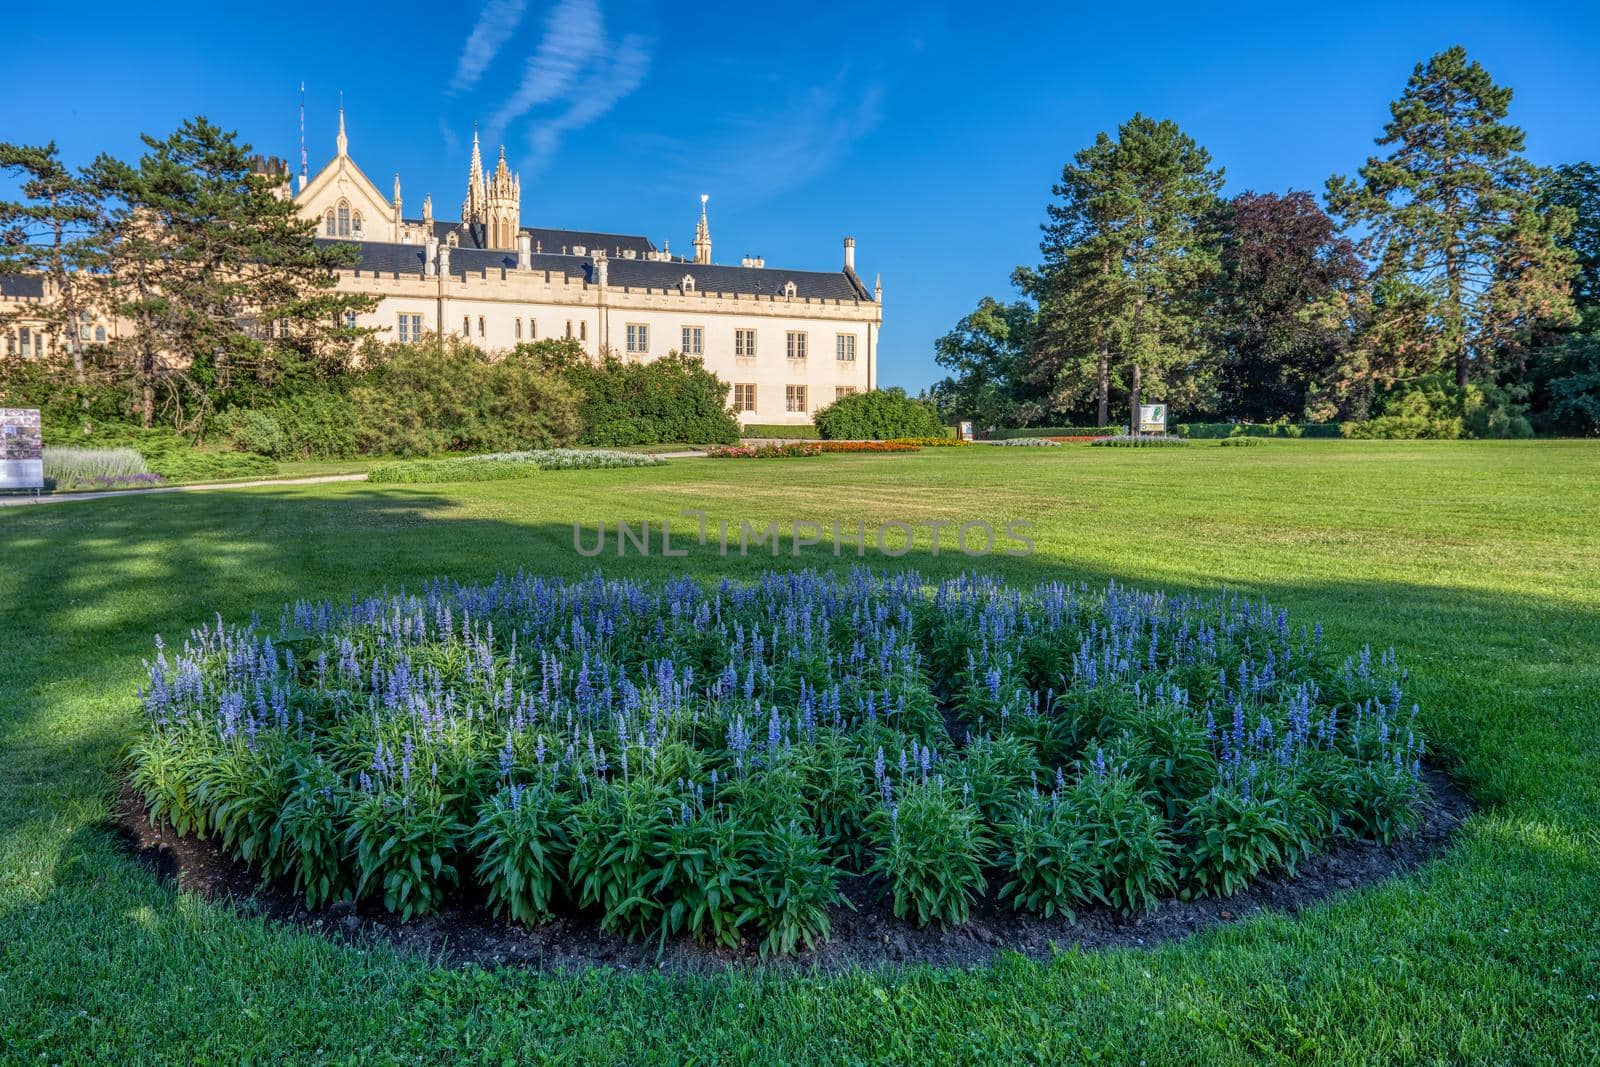 Lednice Chateau with beautiful gardens and parks on sunny summer day by artush